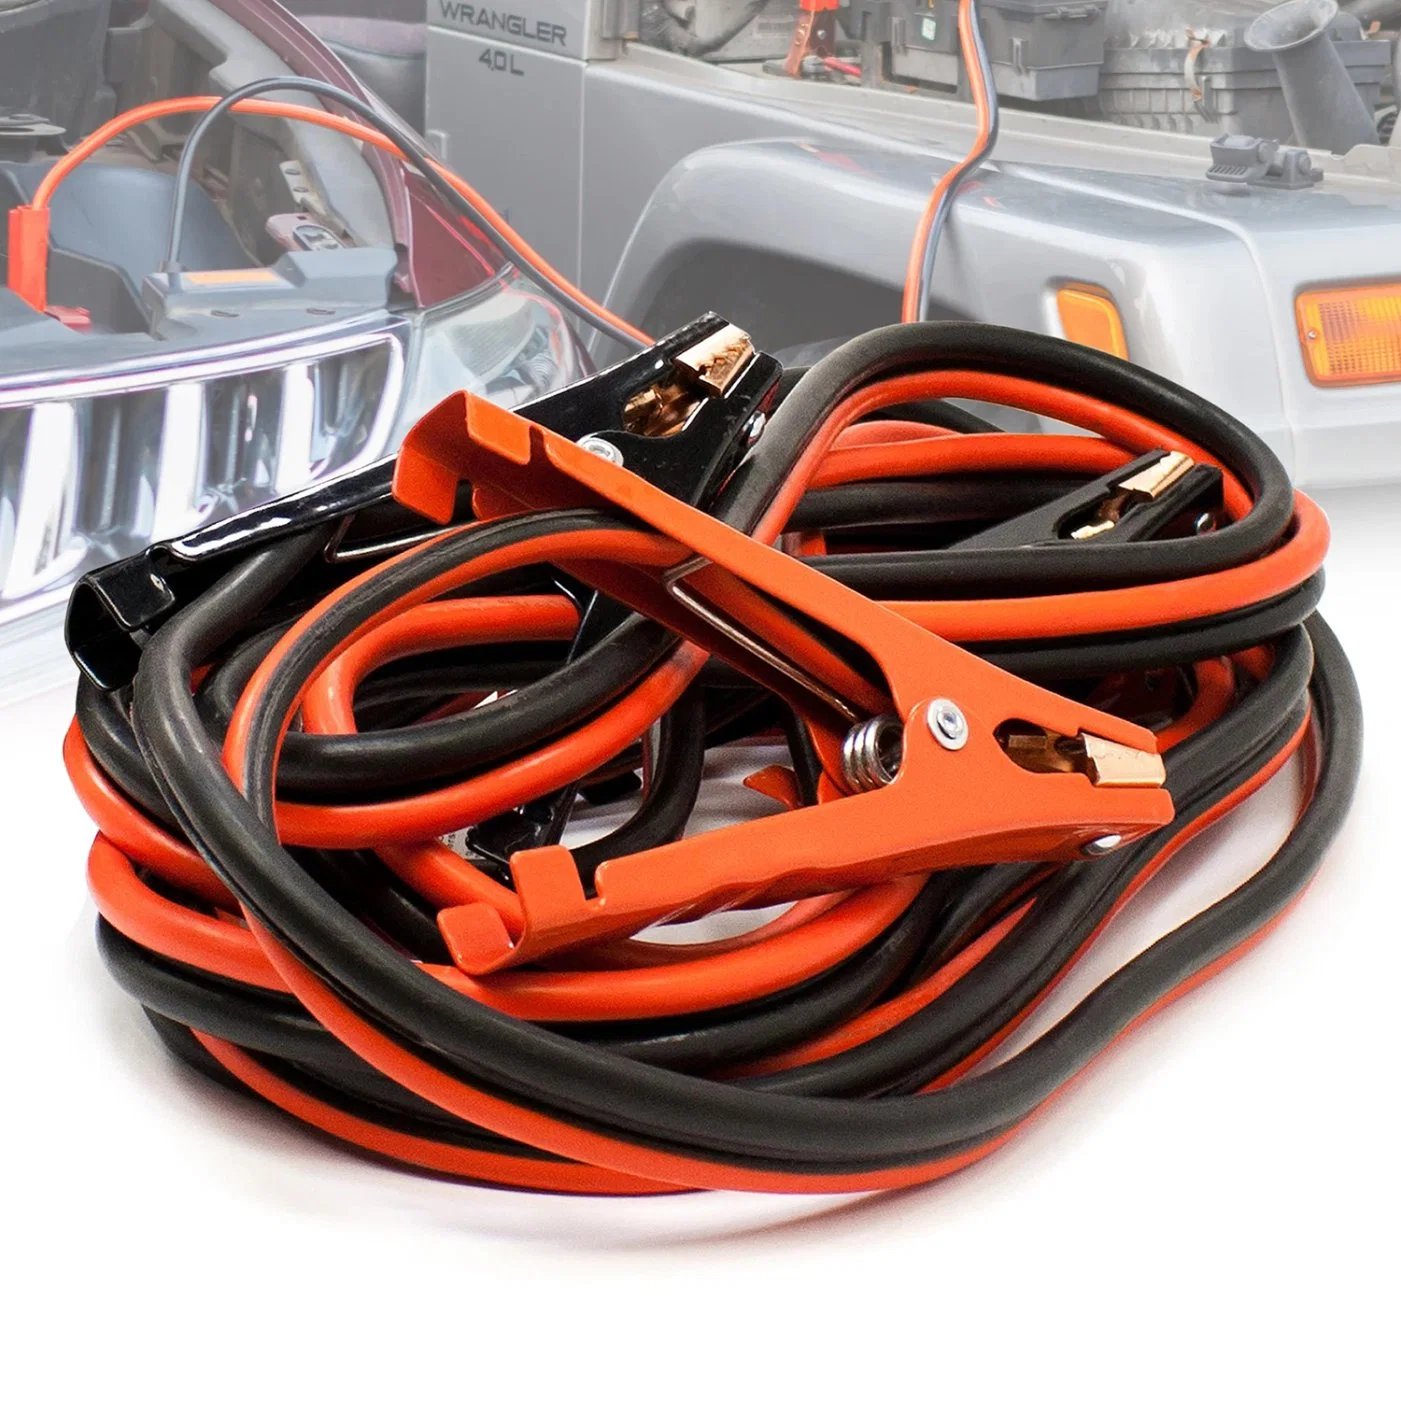 20FT Heavy Duty Jump Leads 500 AMP Battery Booster Jumper Cables Colour Coated Clamps Booster Cable for Petrol Diesel Car Van Truck (BC0420)